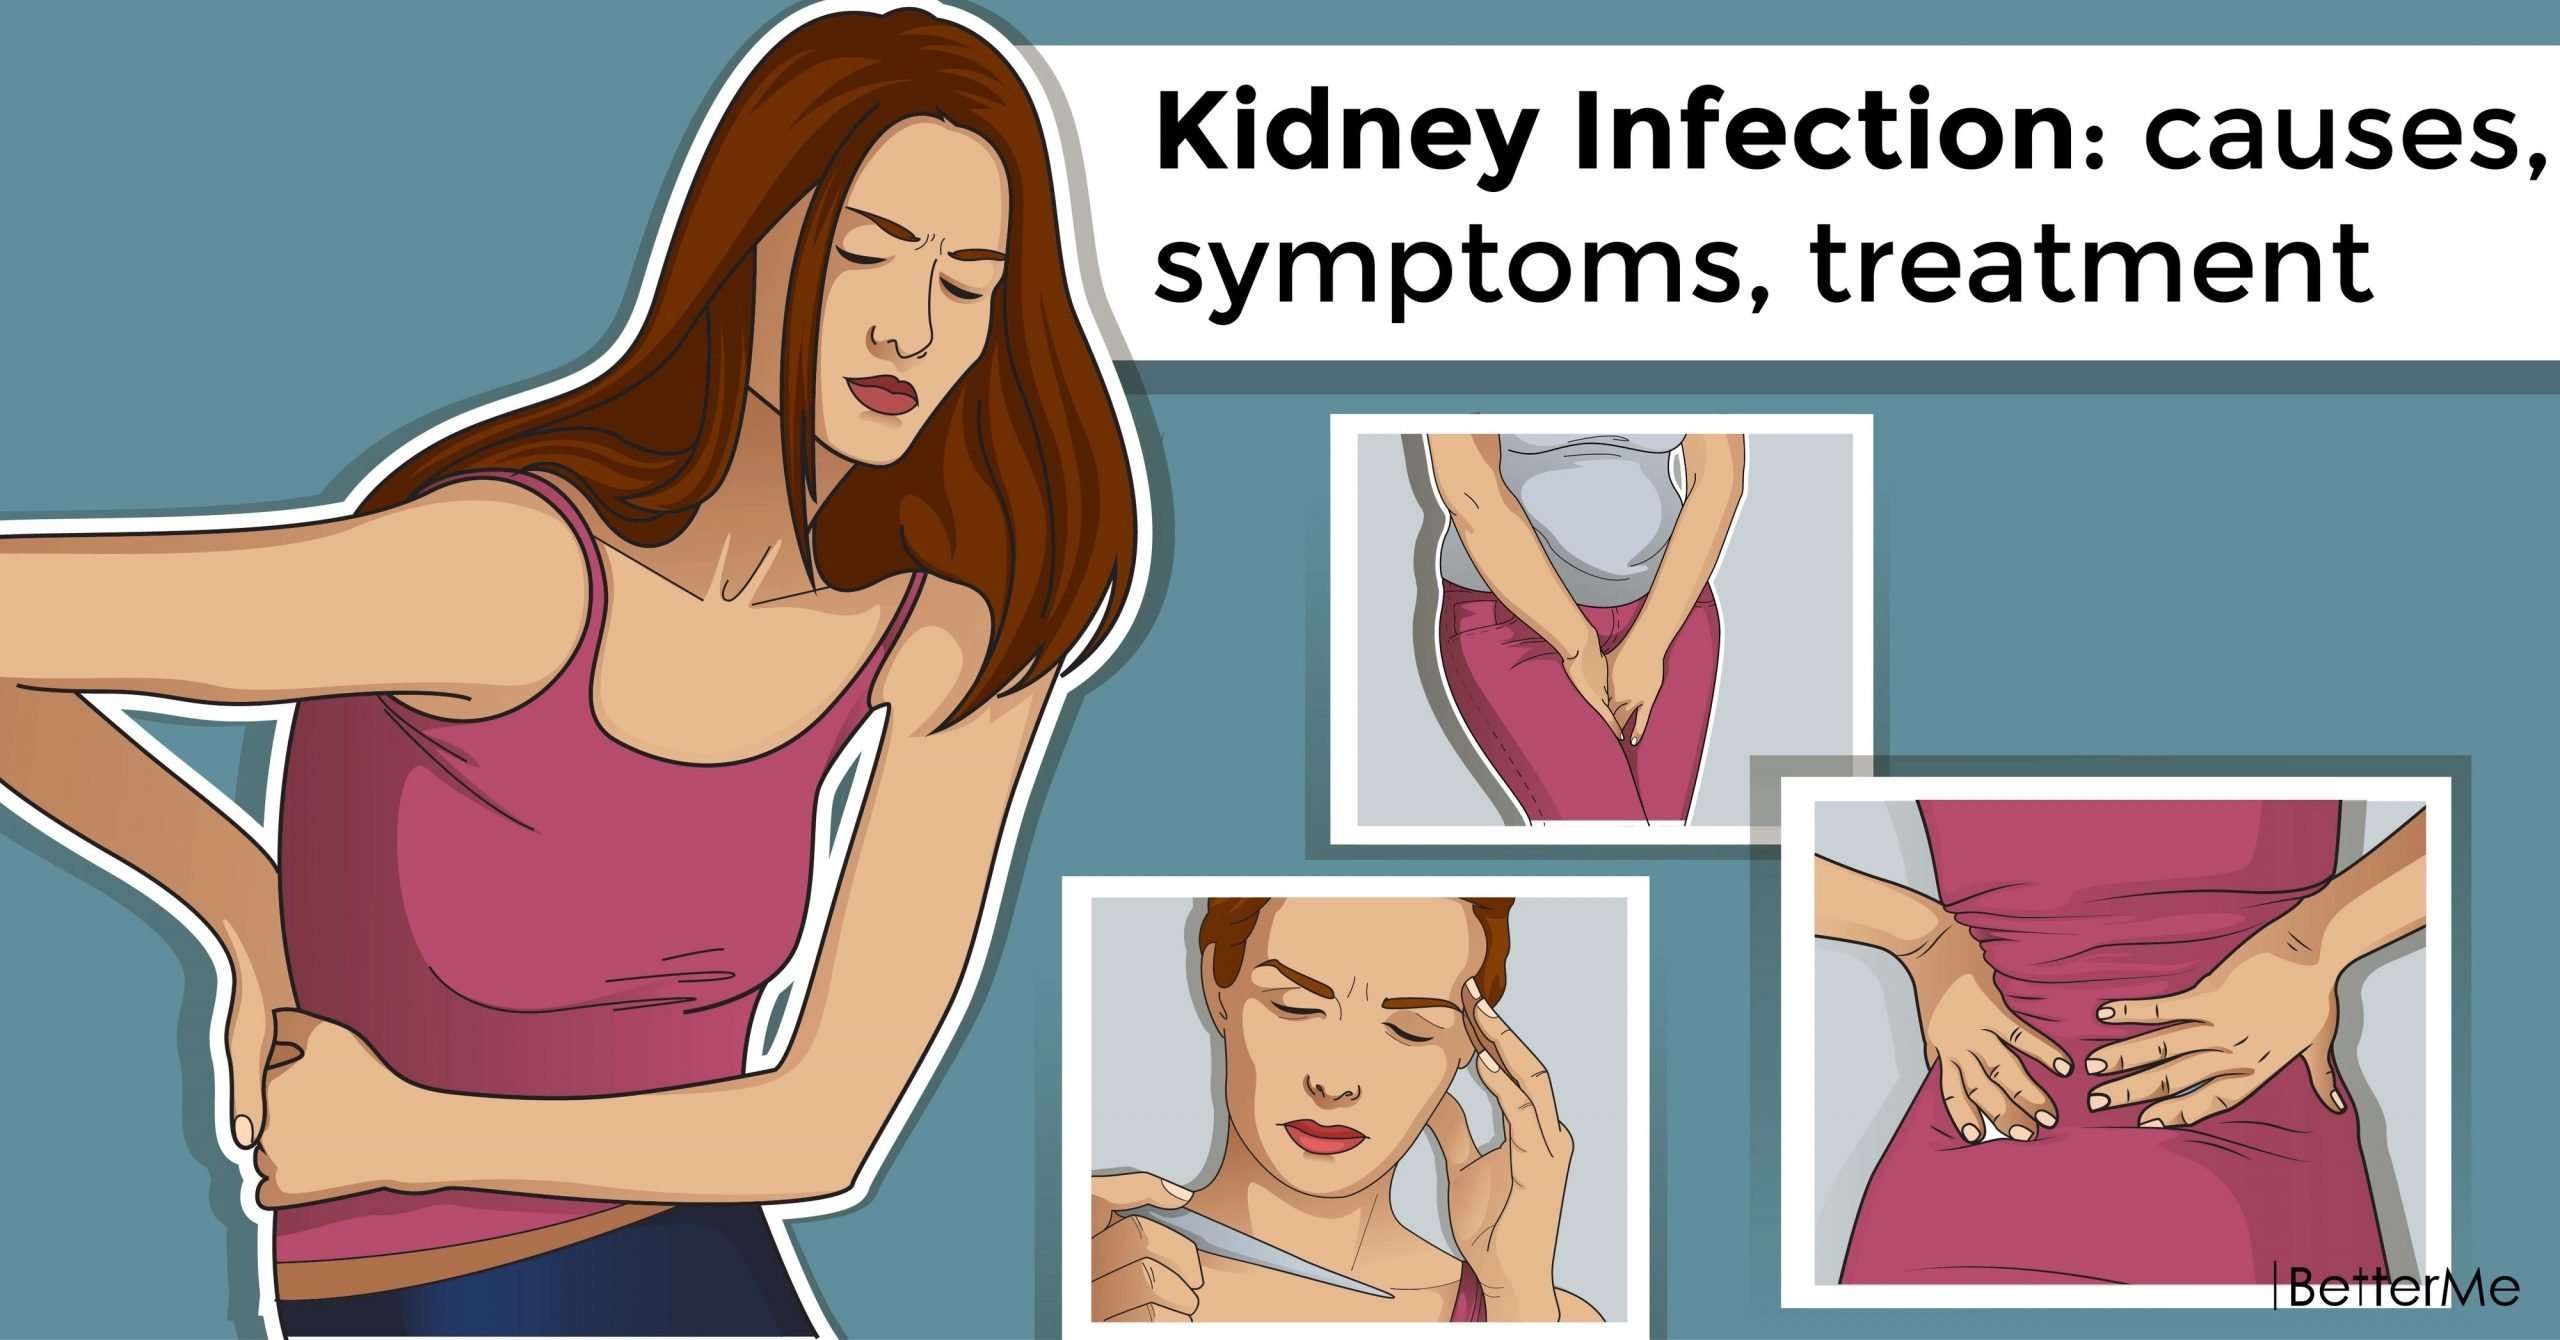 Kidney Infection: causes, symptoms, treatment